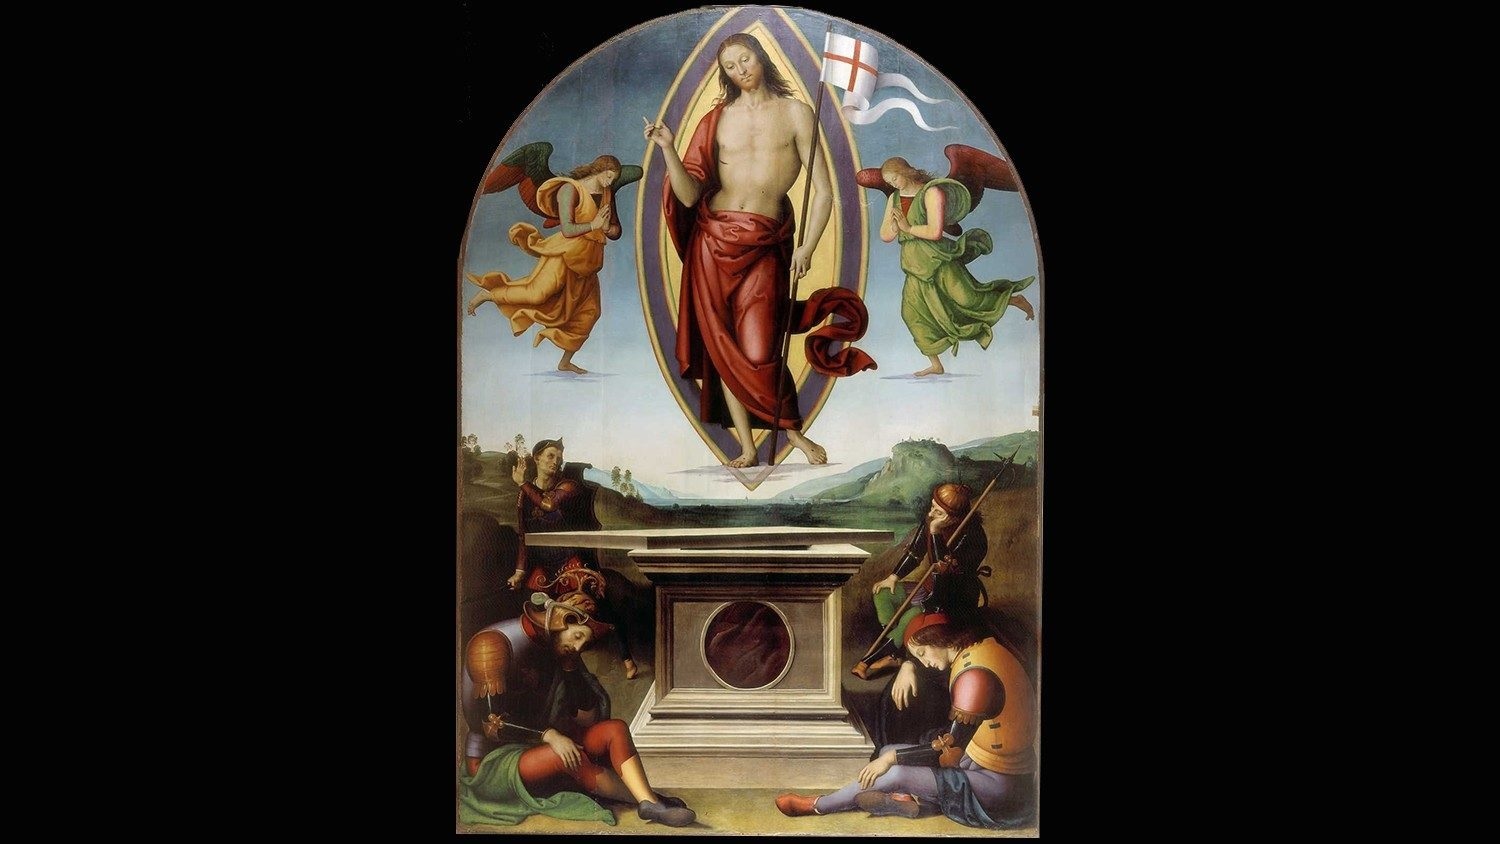 (EUR19.Proof.2023.CN1665) 25 € Vatican 2023 Proof silver - Resurrection of Christ, by Perugino (blog) (zoom)